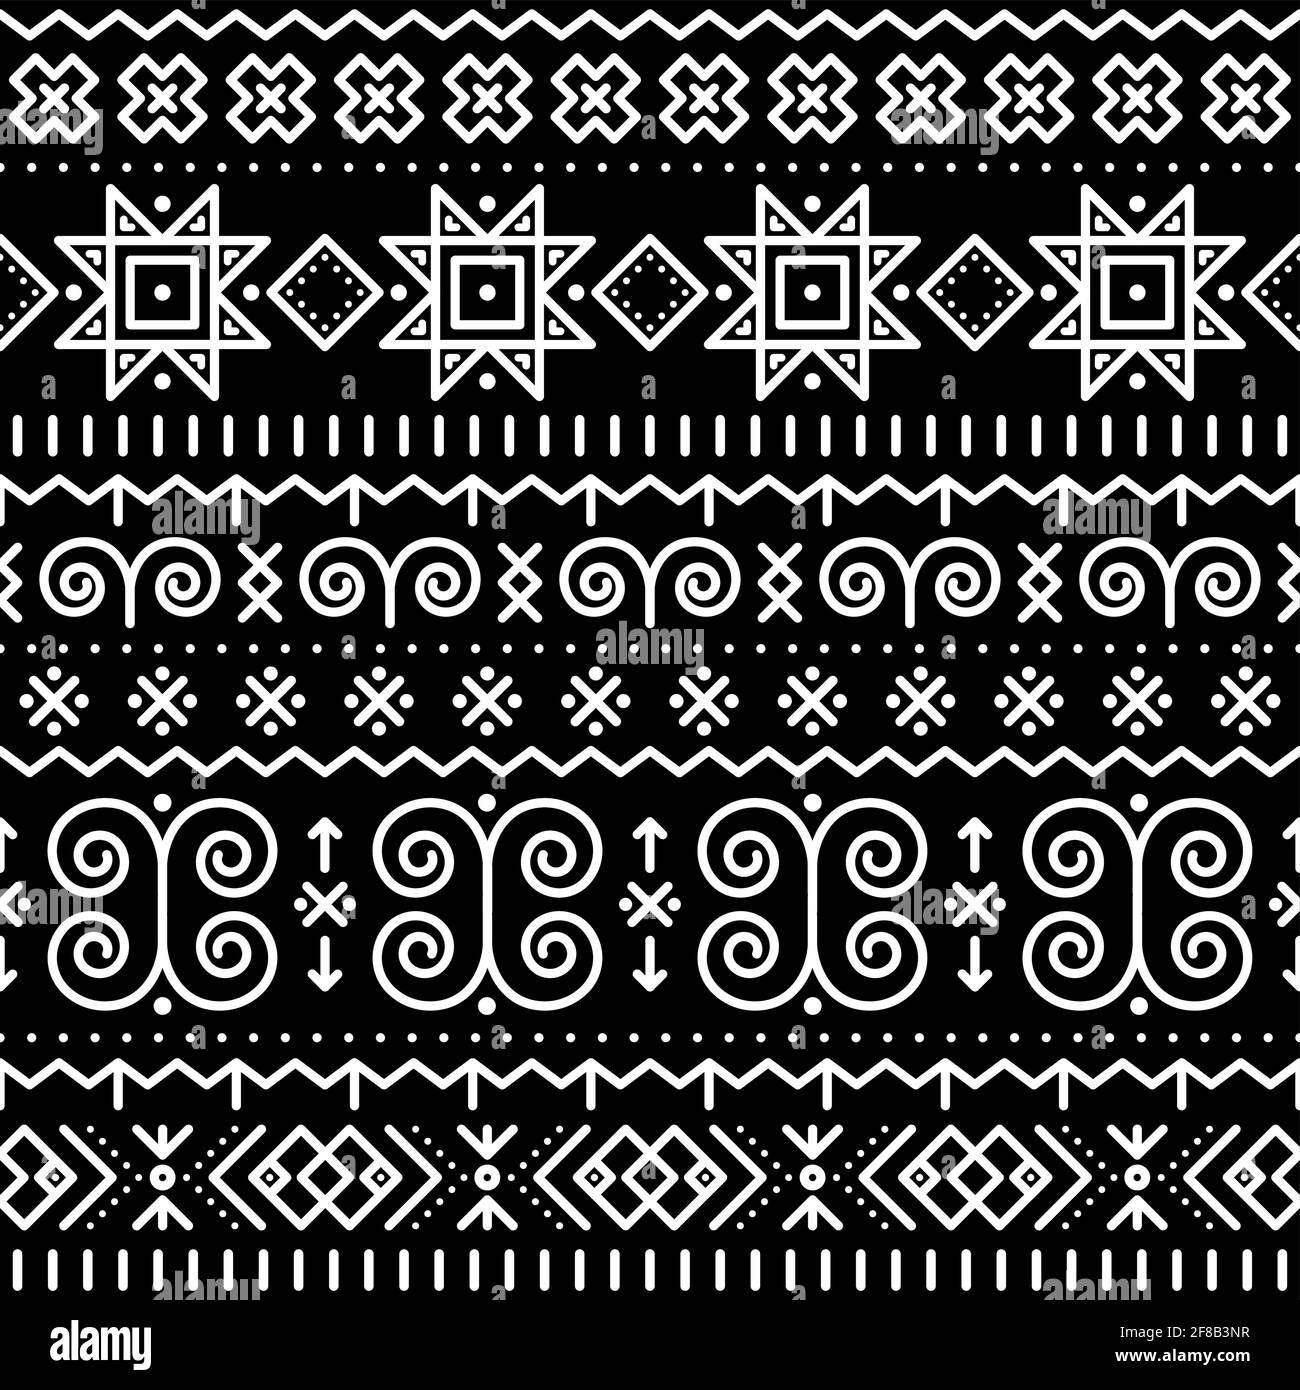 Slovak folk art vector seamless geometric pattern with swirls, zig-zag shapes inspired by traditional painted art from village Cicmany in Zilina regio Stock Vector